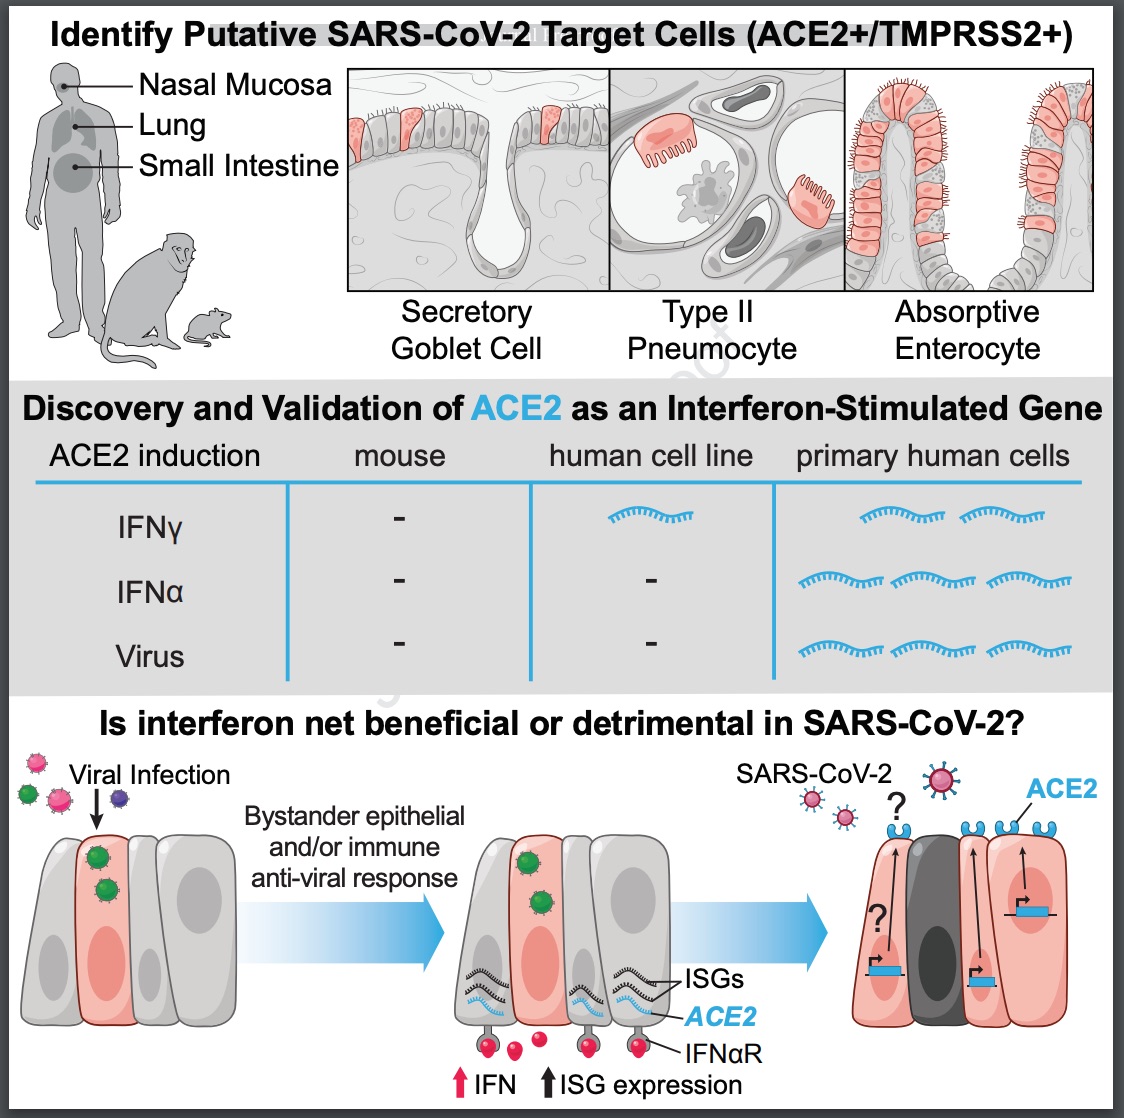 Another study in  @CellCellPress demonstrates that SARS-CoV-2 infection induces an IFN response that in turn leads to the up-regulation of ACE2, raising concerns that repurposing interferon therapy may have a detrimental effect in COVID-19.  @carlygailz  https://doi.org/10.1016/j.cell.2020.04.035